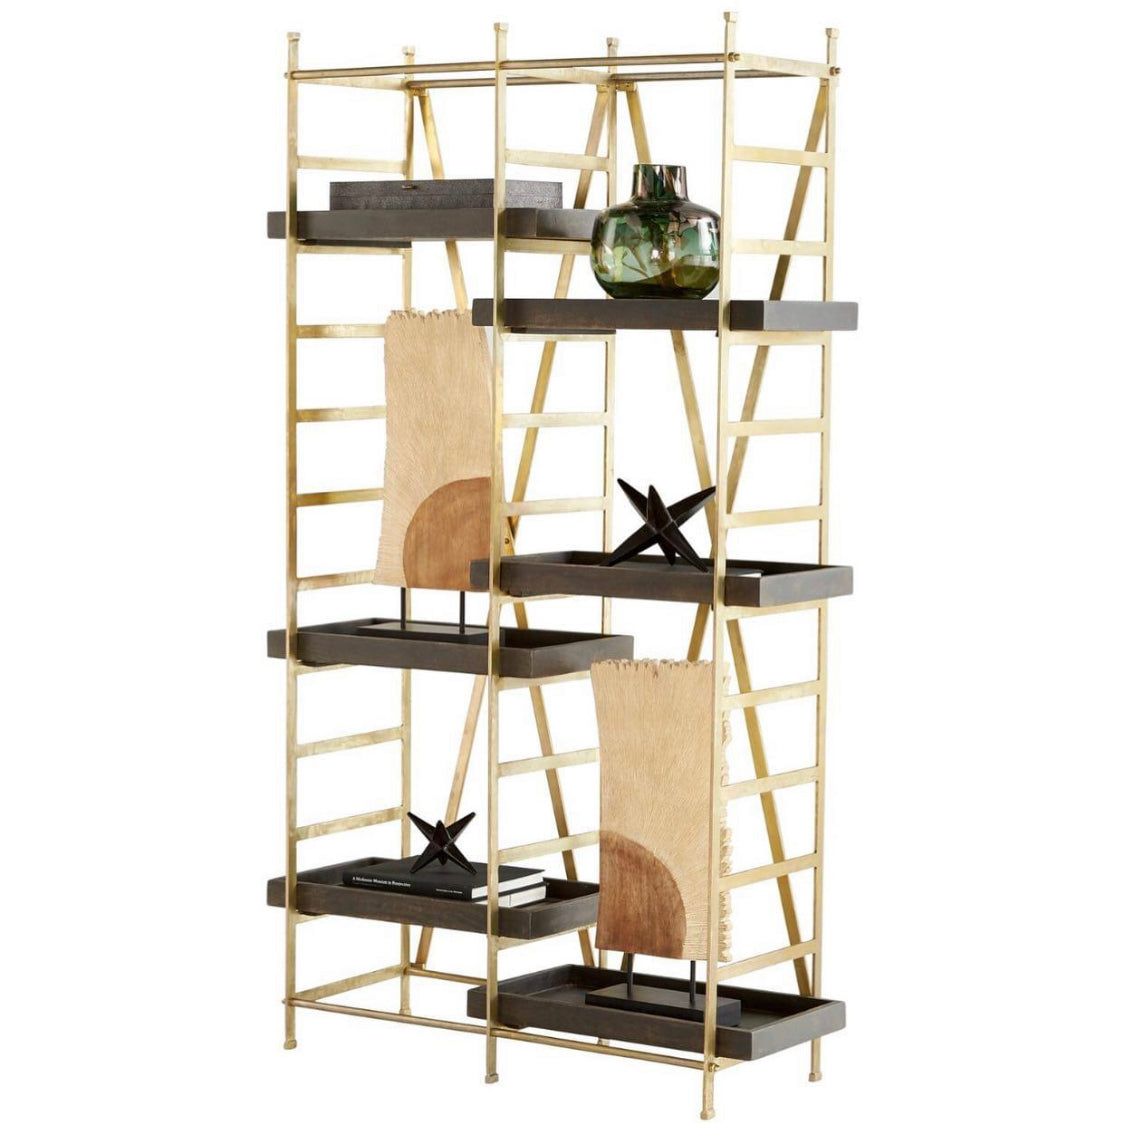 The ultra stylish Corsetto etagere features the perfect blend of industrial and mid-century modern styles. Available in an antiqued gold and natural grey finish combination, the adjustable shelves draw attention to the unique personality of the wood grain and its sophisticated iron frame adds versatile fashion to shelving unit, making it the perfect storage solution to any ornate living room, den, or bedroom application.  Dimensions: H 72.75 x W 41.5 x Depth 15.25